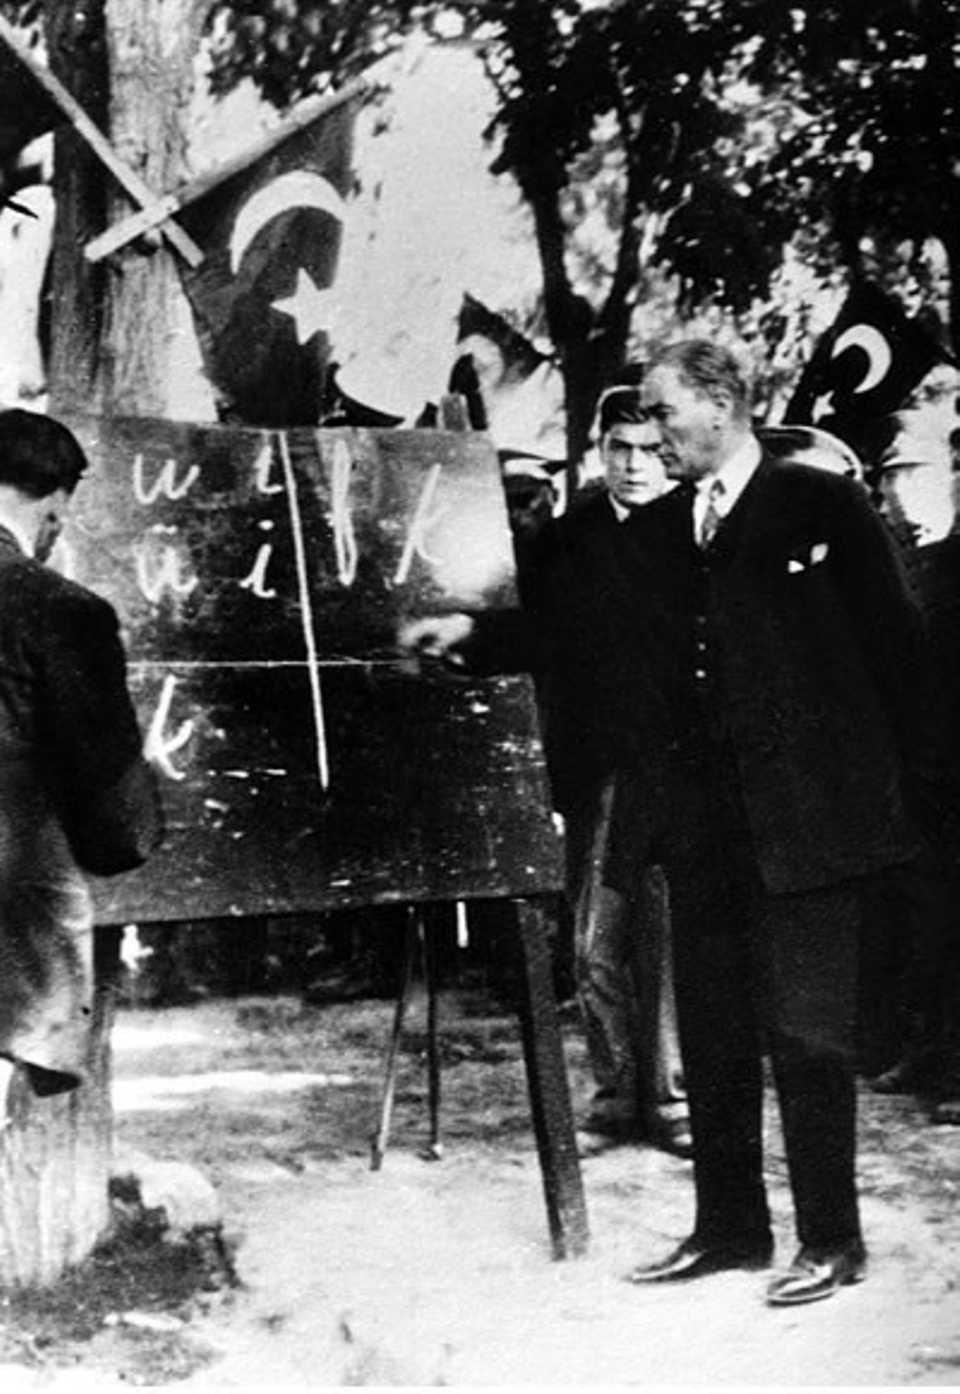 In November 1928, soon after the Republic was declared, Mustafa Kemal changed written Turkish, using Roman letters instead of the previous Ottoman Arabic script. He introduced the new Latin alphabet overnight. Picture: Mustafa Kemal teaching the new alphabet to the people of Kayseri. September 20, 1928.